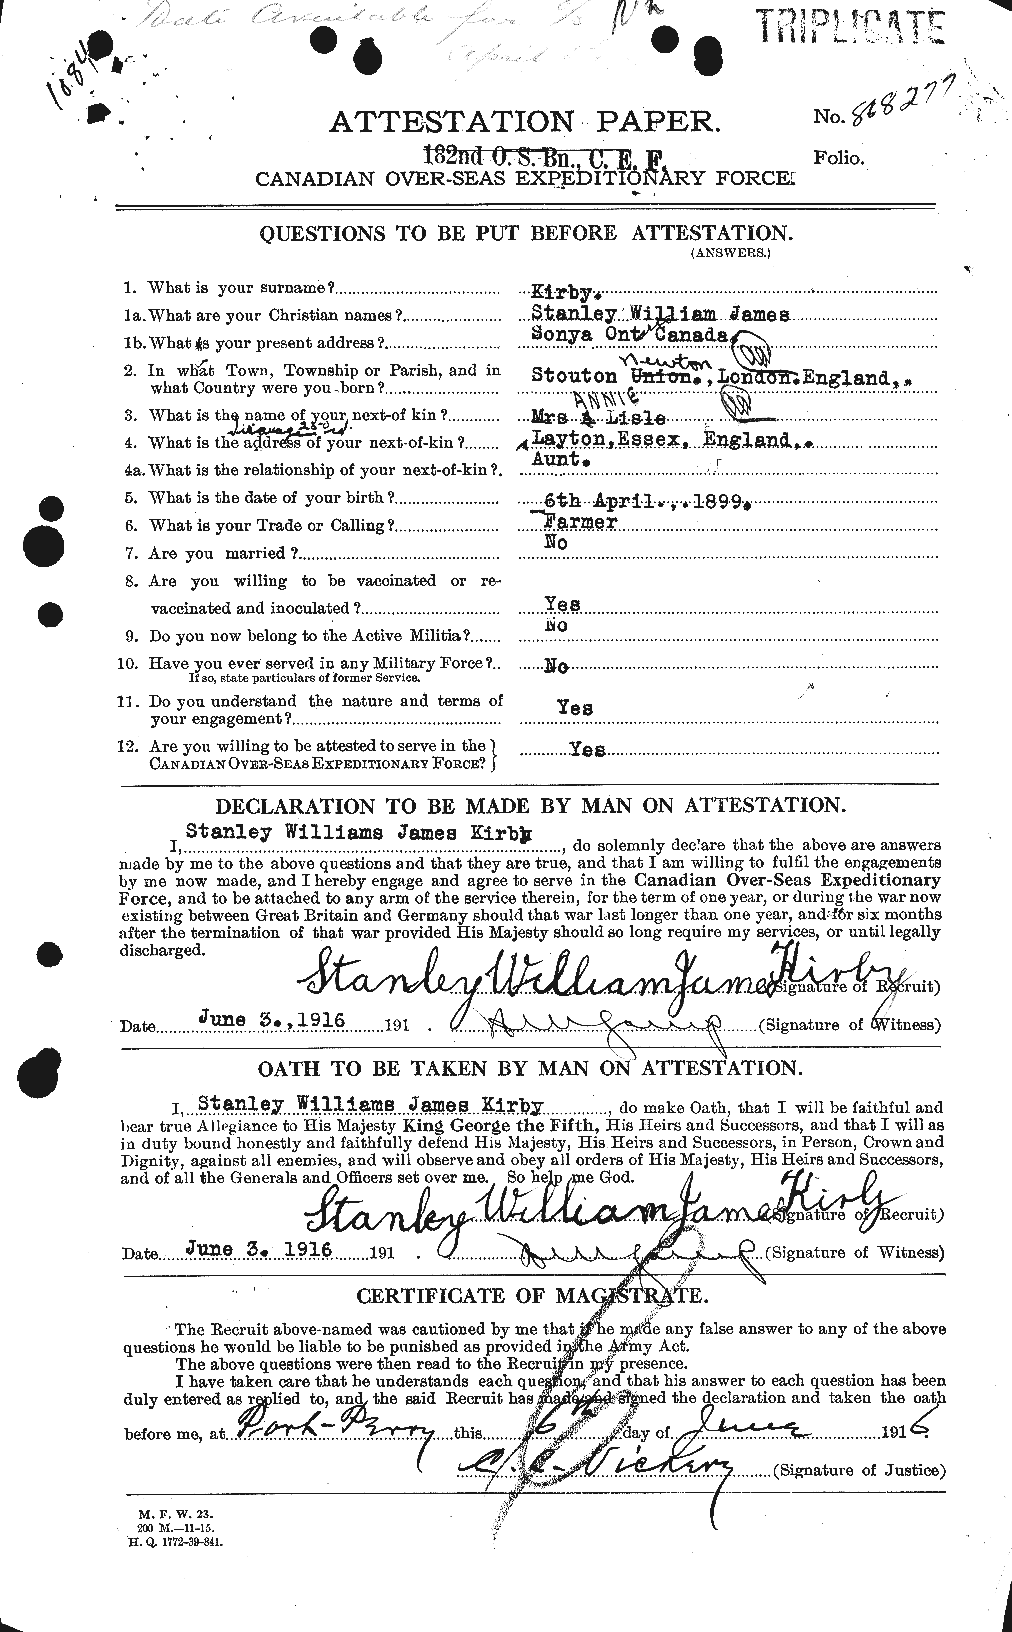 Personnel Records of the First World War - CEF 437276a